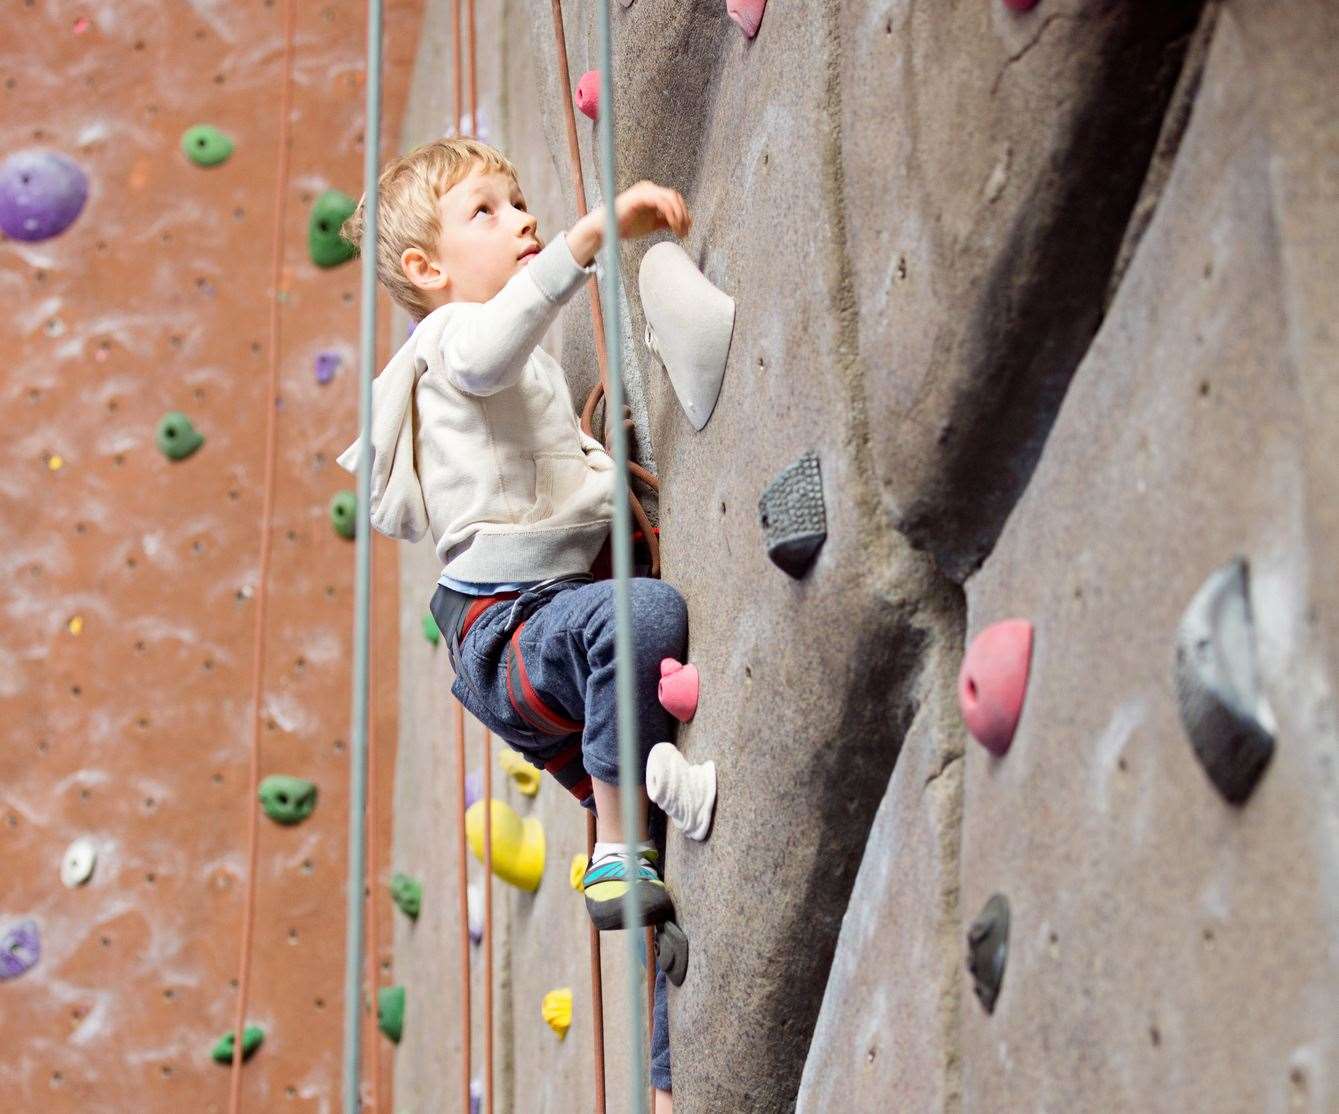 Get climbing at the new Climbing Experience in Maidstone